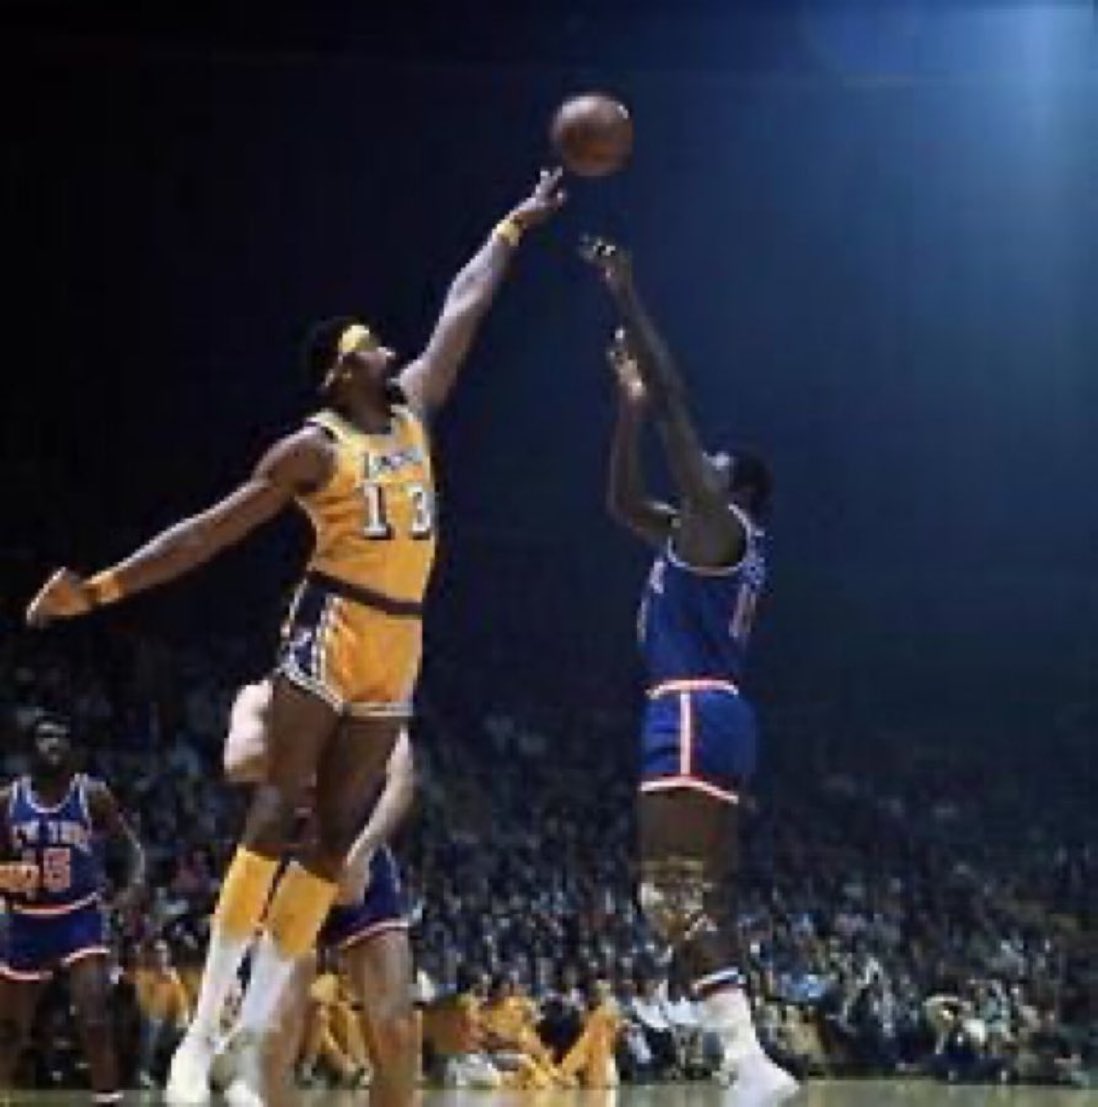 On May 10, 1973, the New York Knicks defeated the LA Lakers to win their second NBA championship. Willis Reed would be named series MVP. #NBA